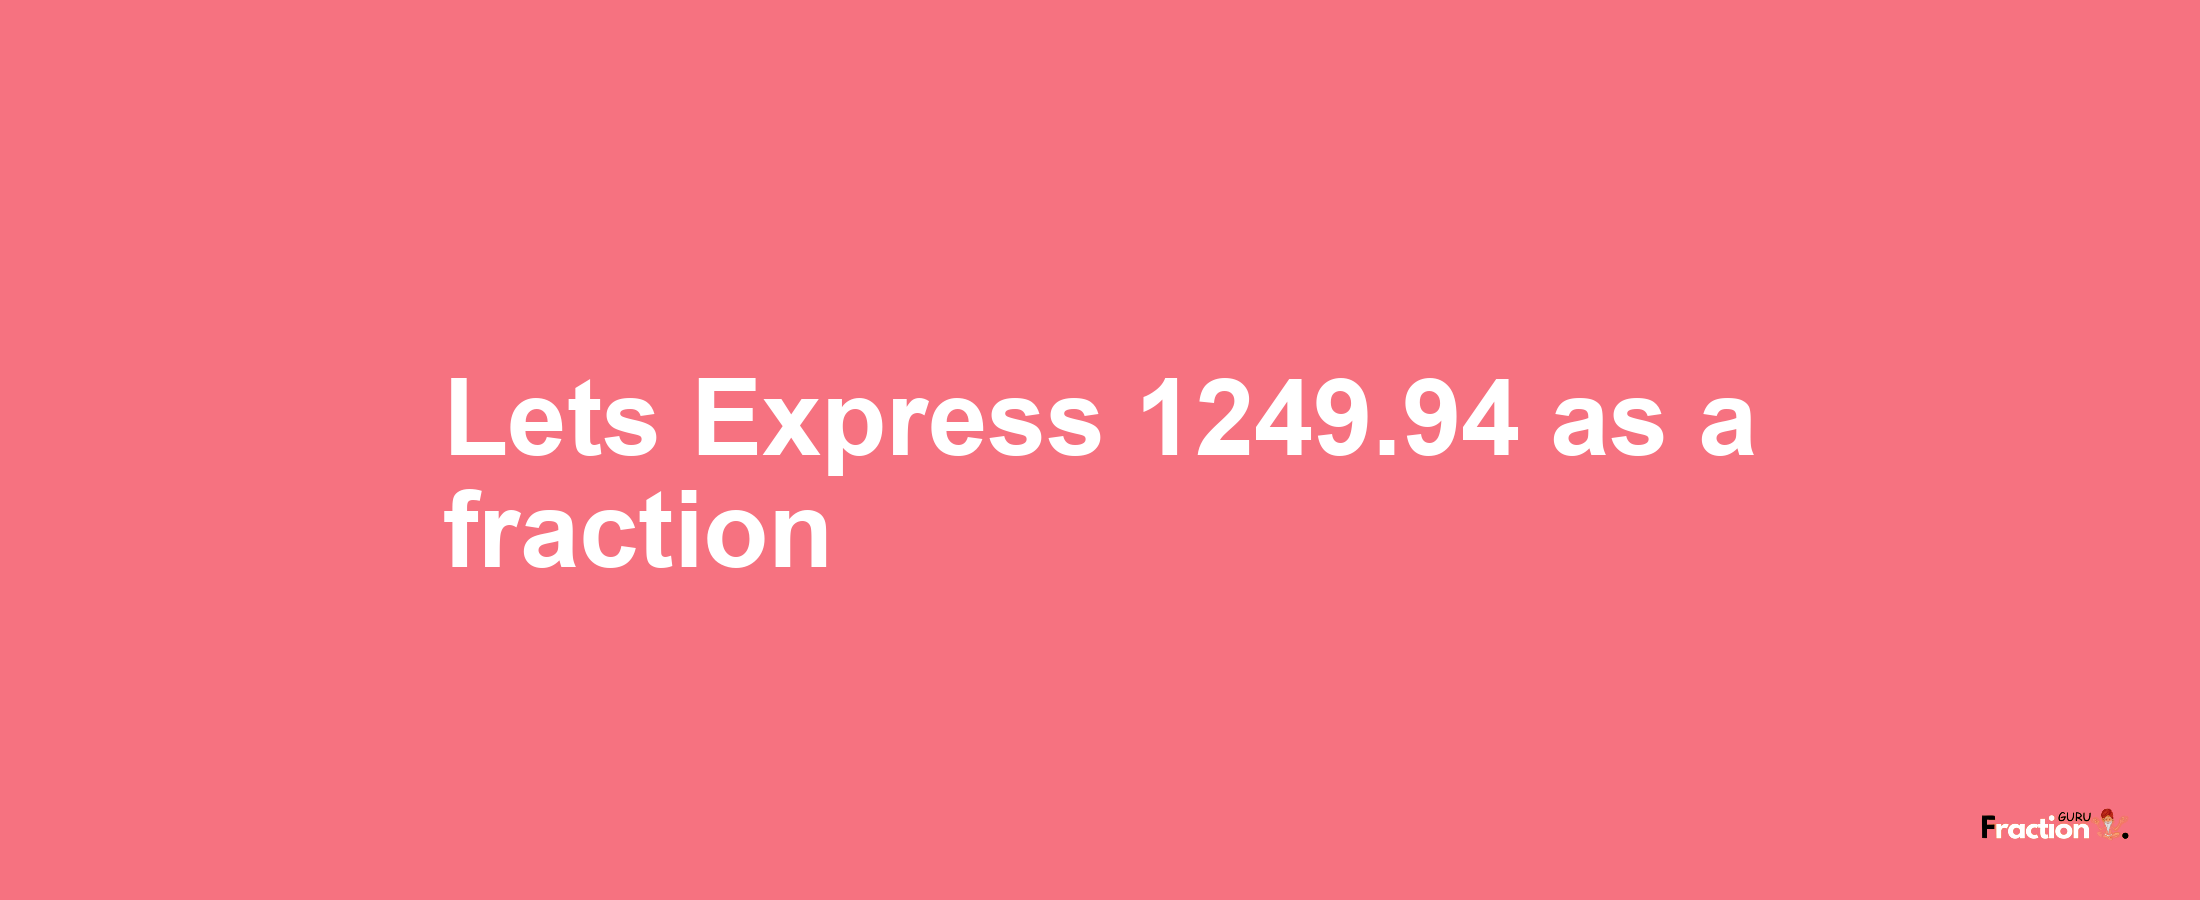 Lets Express 1249.94 as afraction